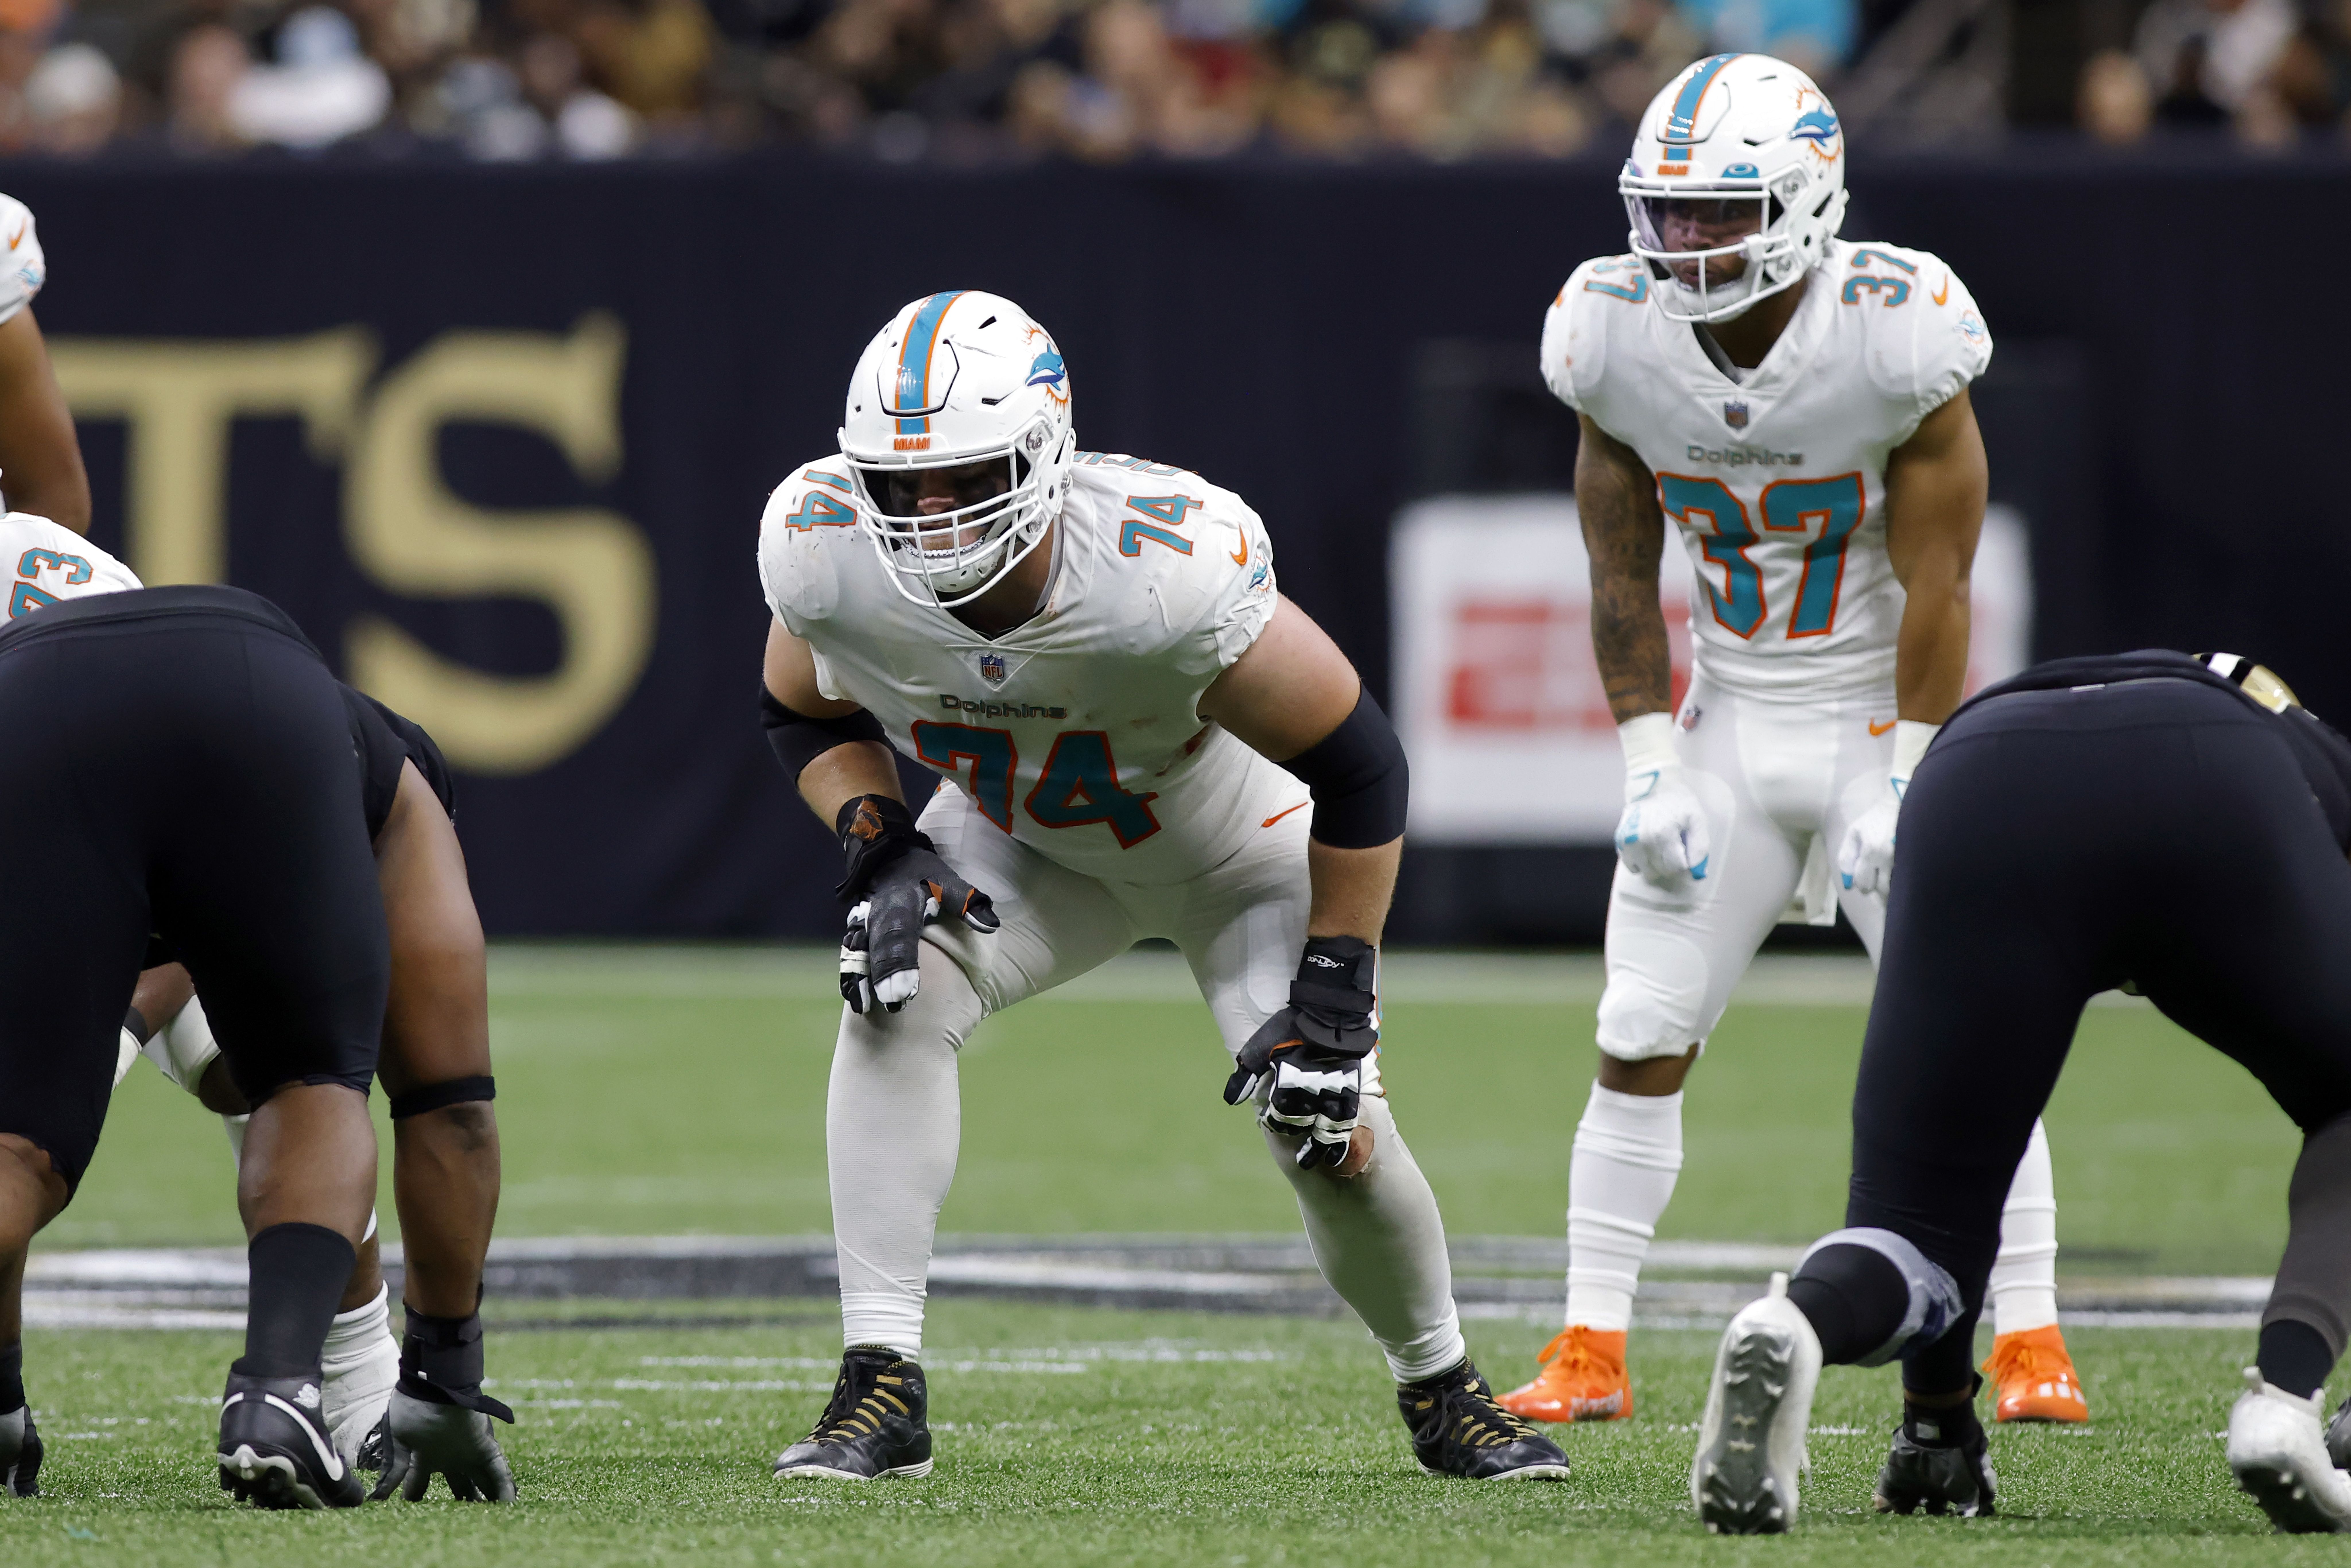 91 days till Dolphins season opener: Every player to wear No. 91 for Miami